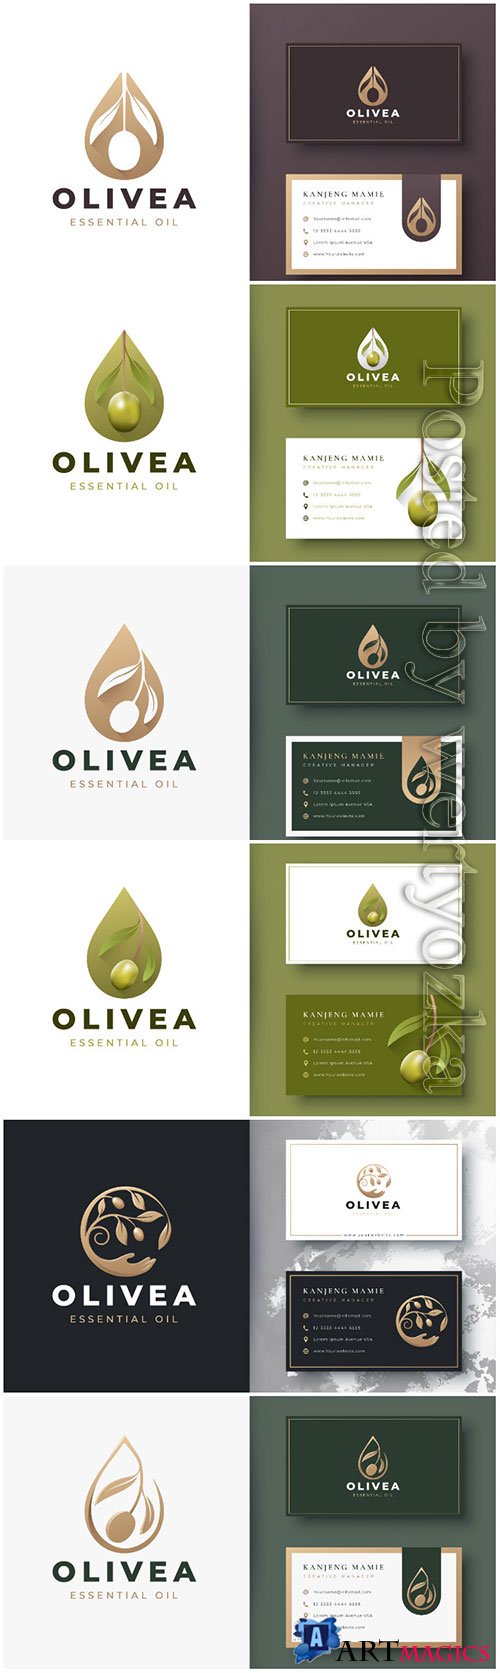 Olive oil logo and business card design premium vector